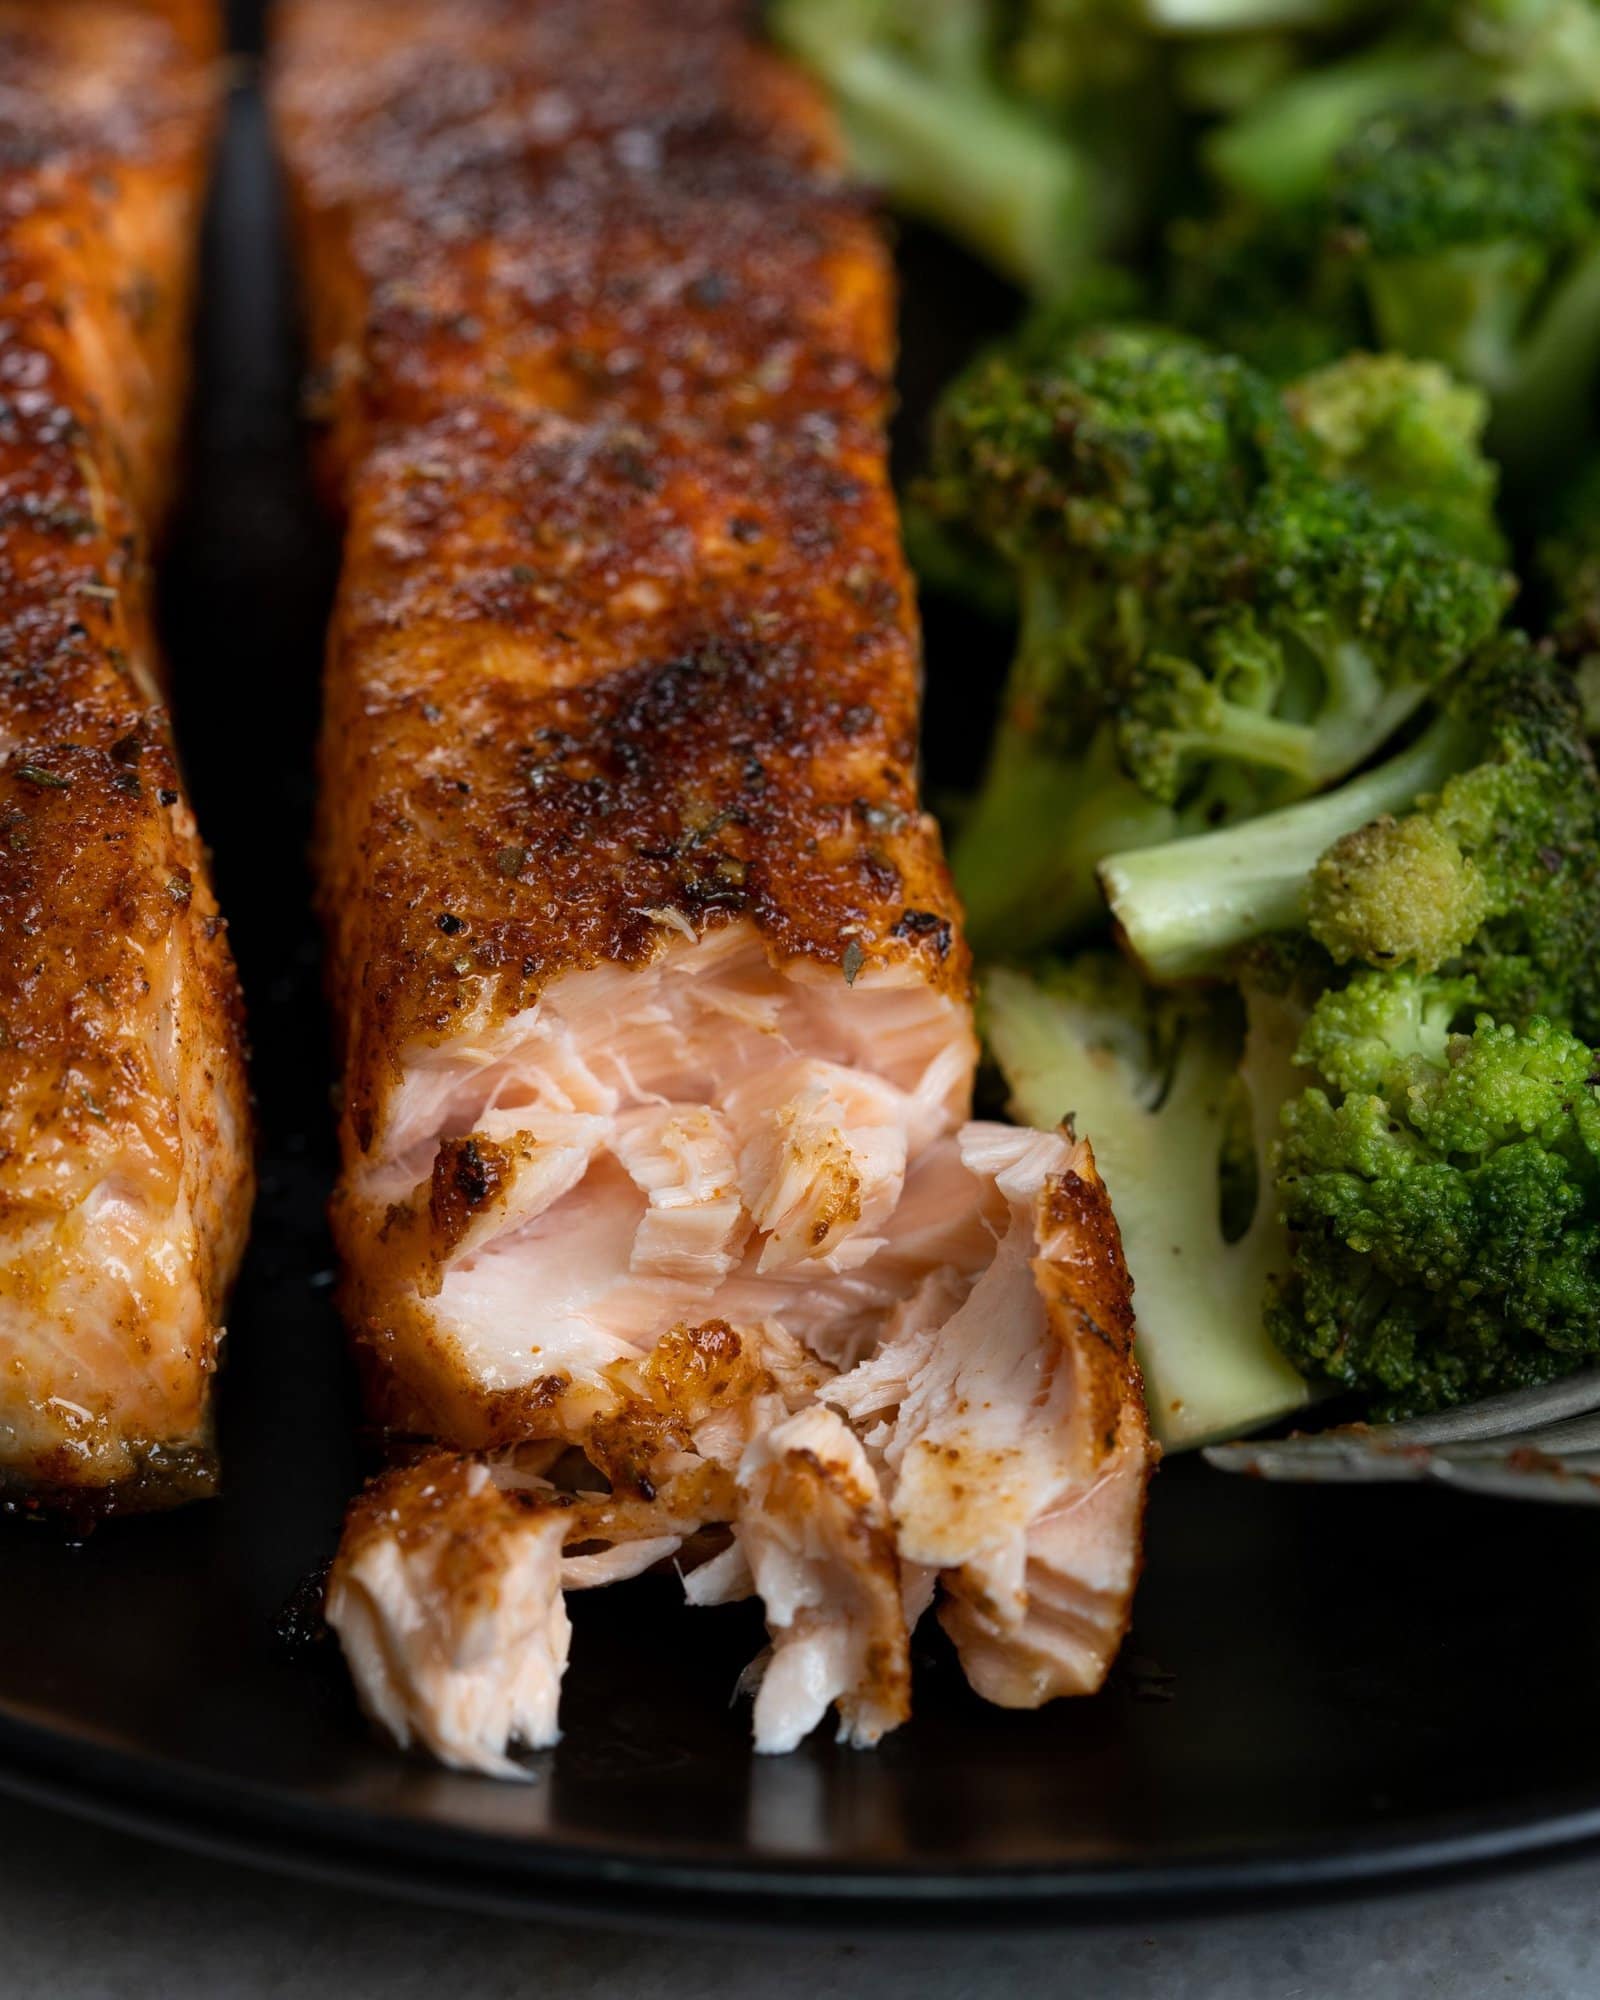 Salmon made in Air Fryer, cut with a fork to show nice crust on top with crispy skin and tender flaky meat inside.